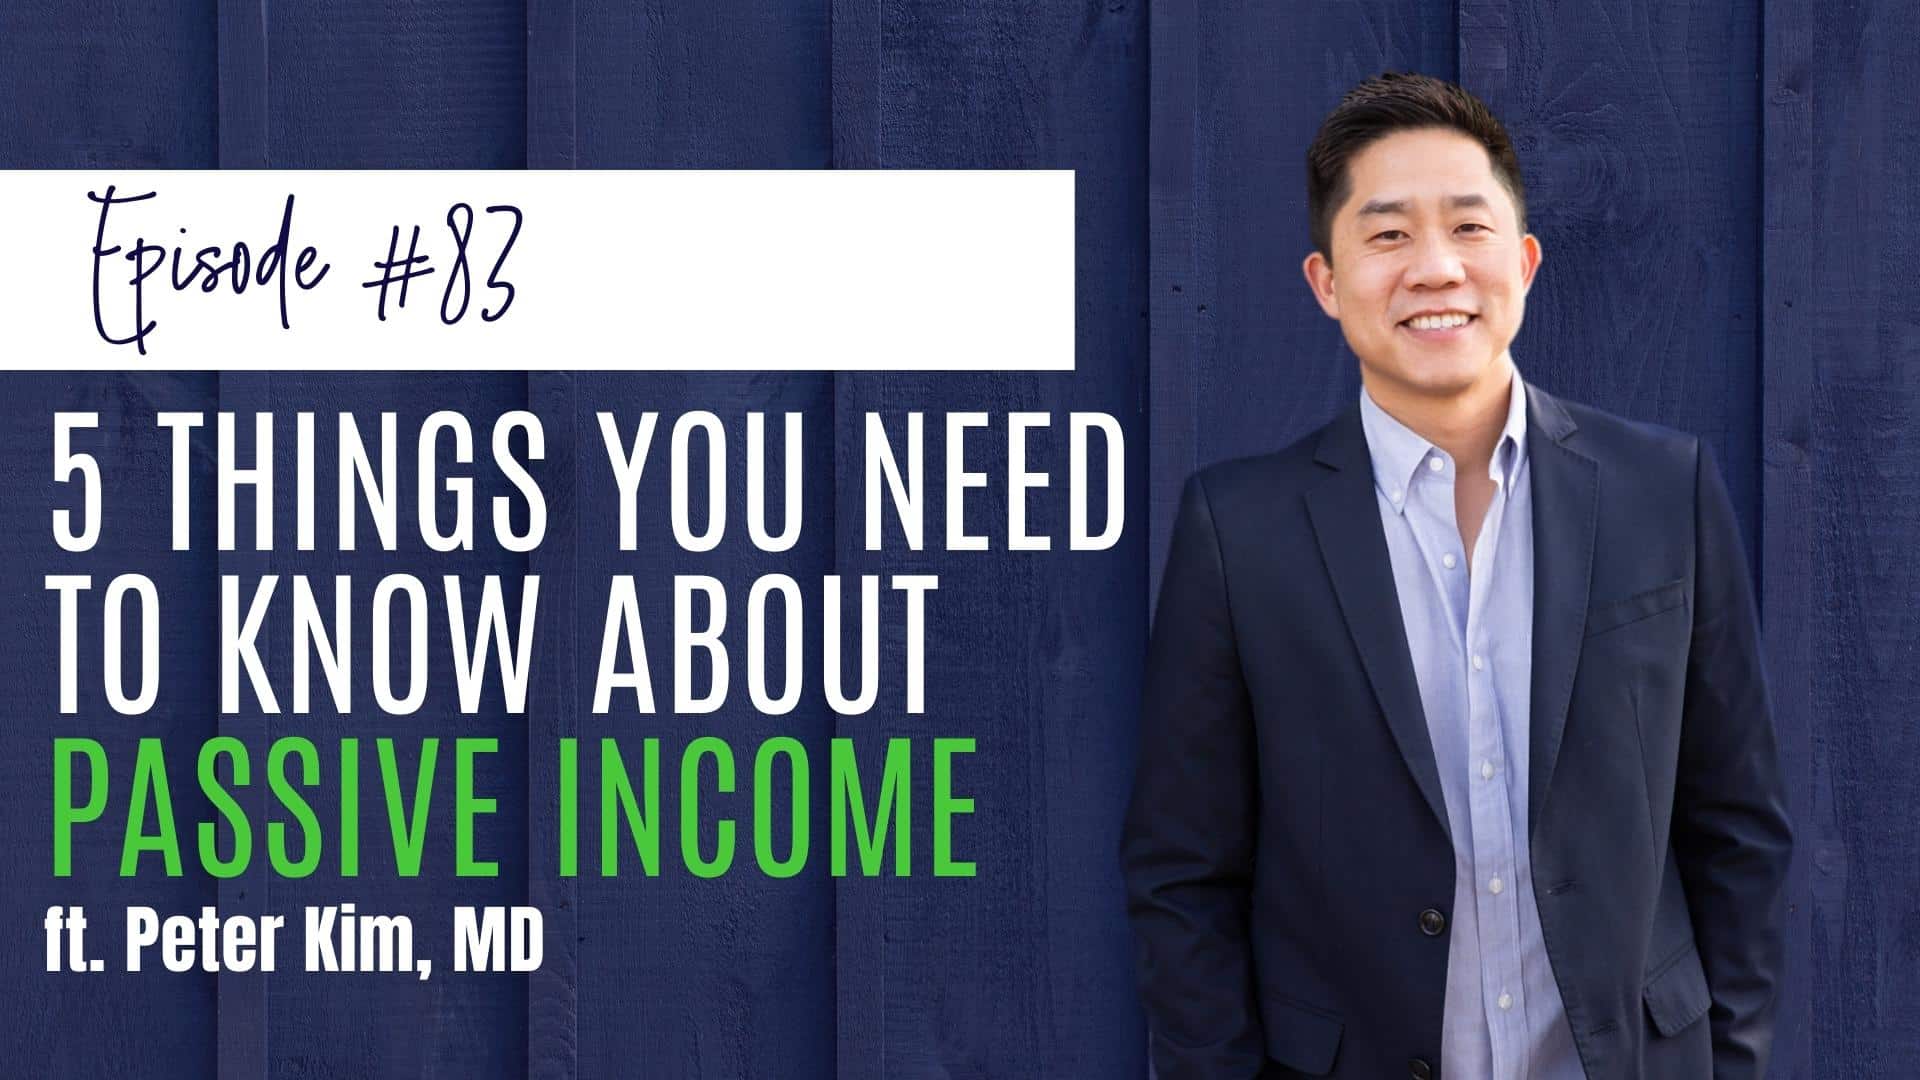 5 Things You Need To Know About Passive Income